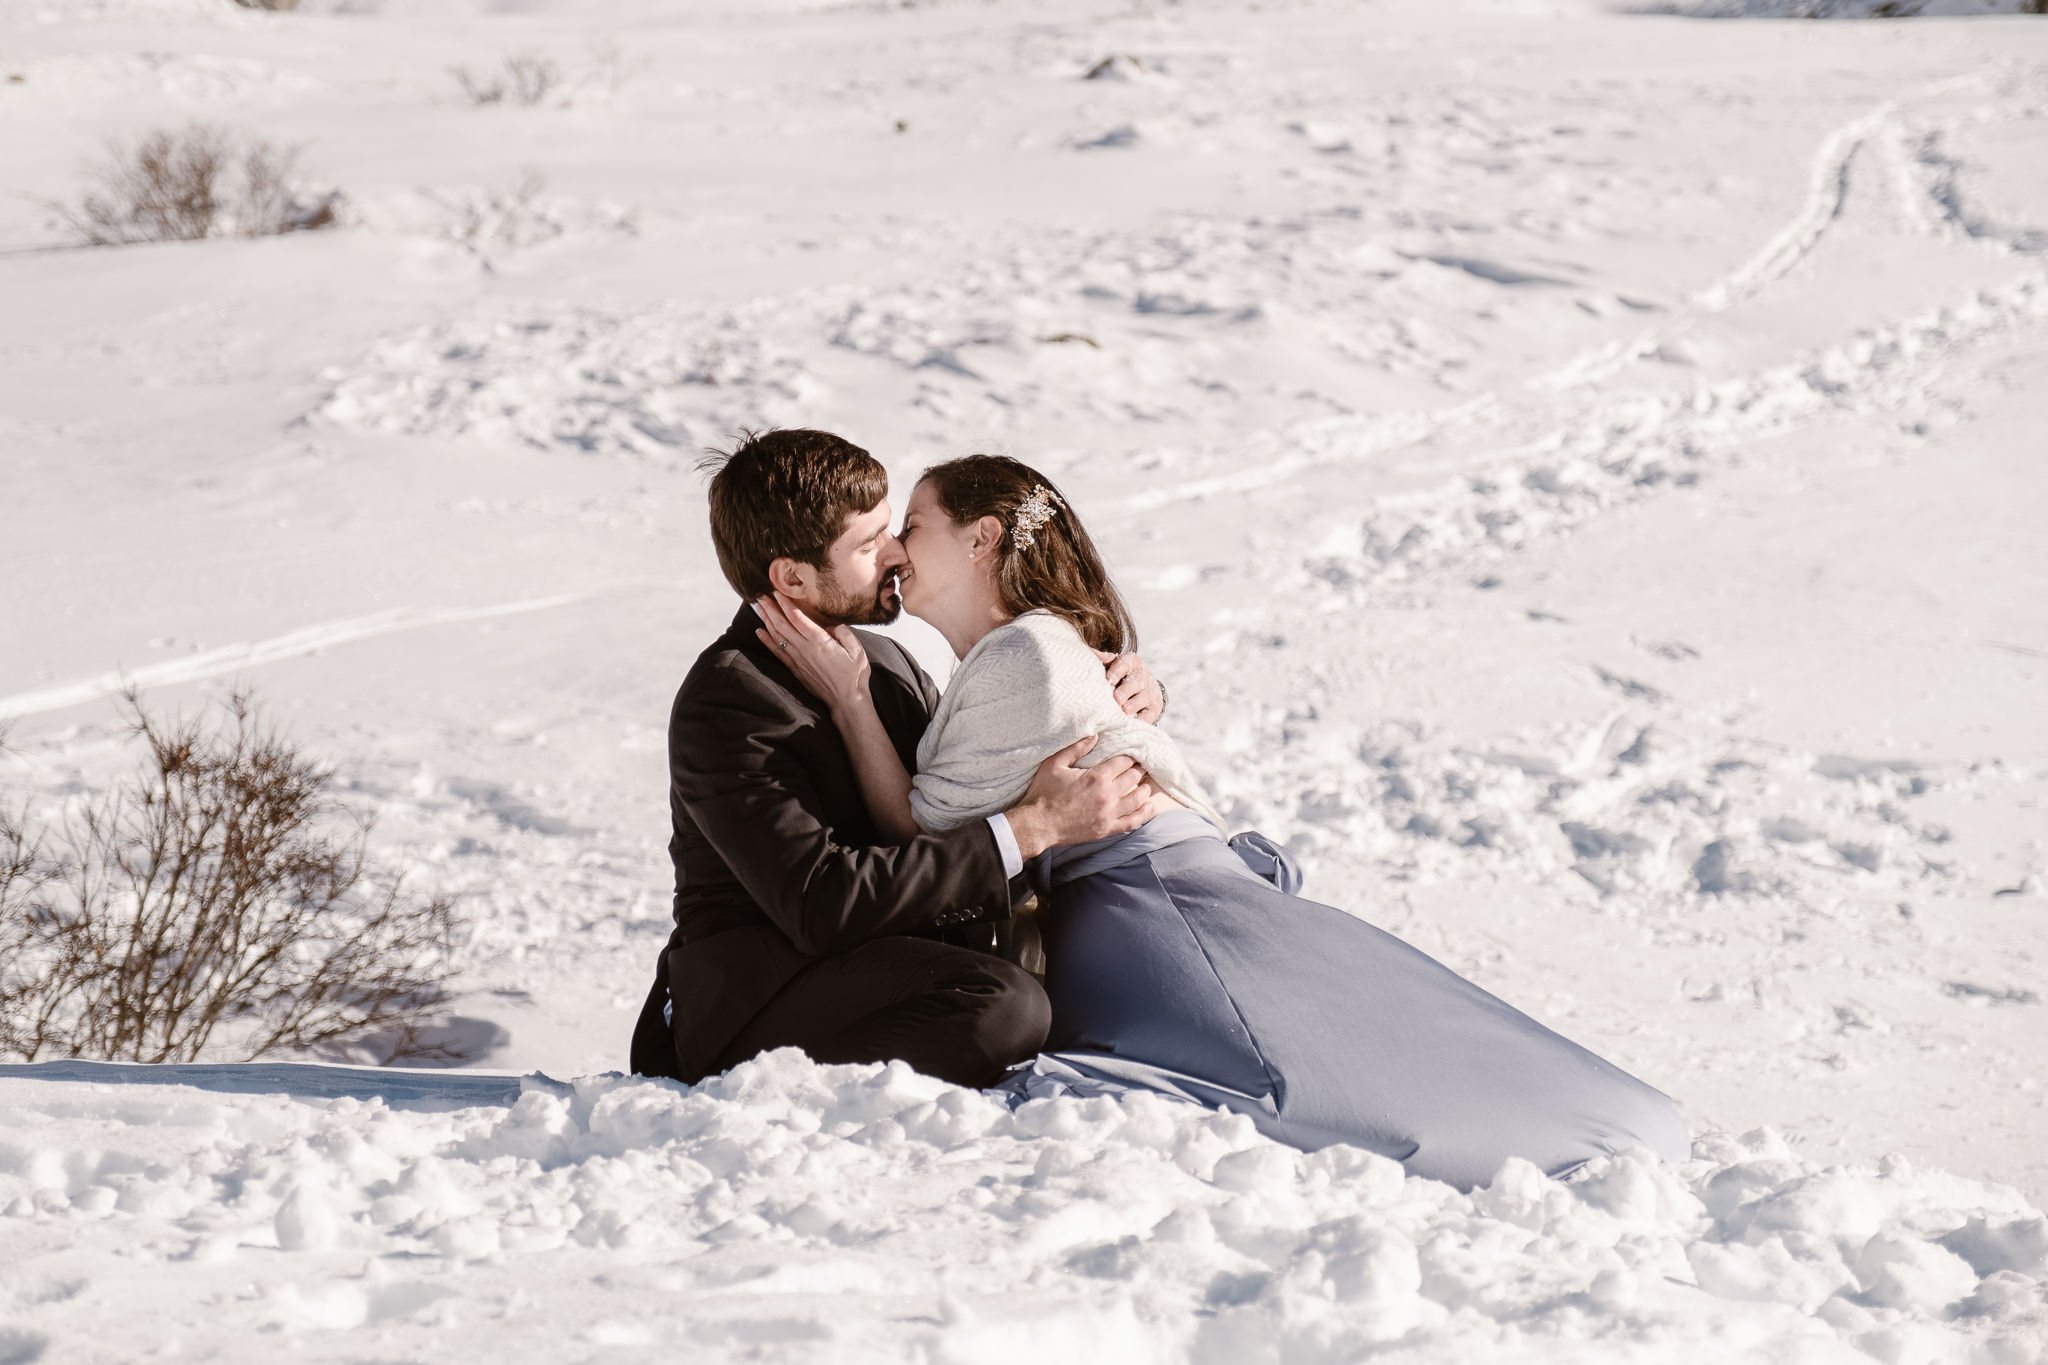 Bride and groom falling over in snow during first kiss, winter mountain elopement, Colorado snow elopement, winter wedding